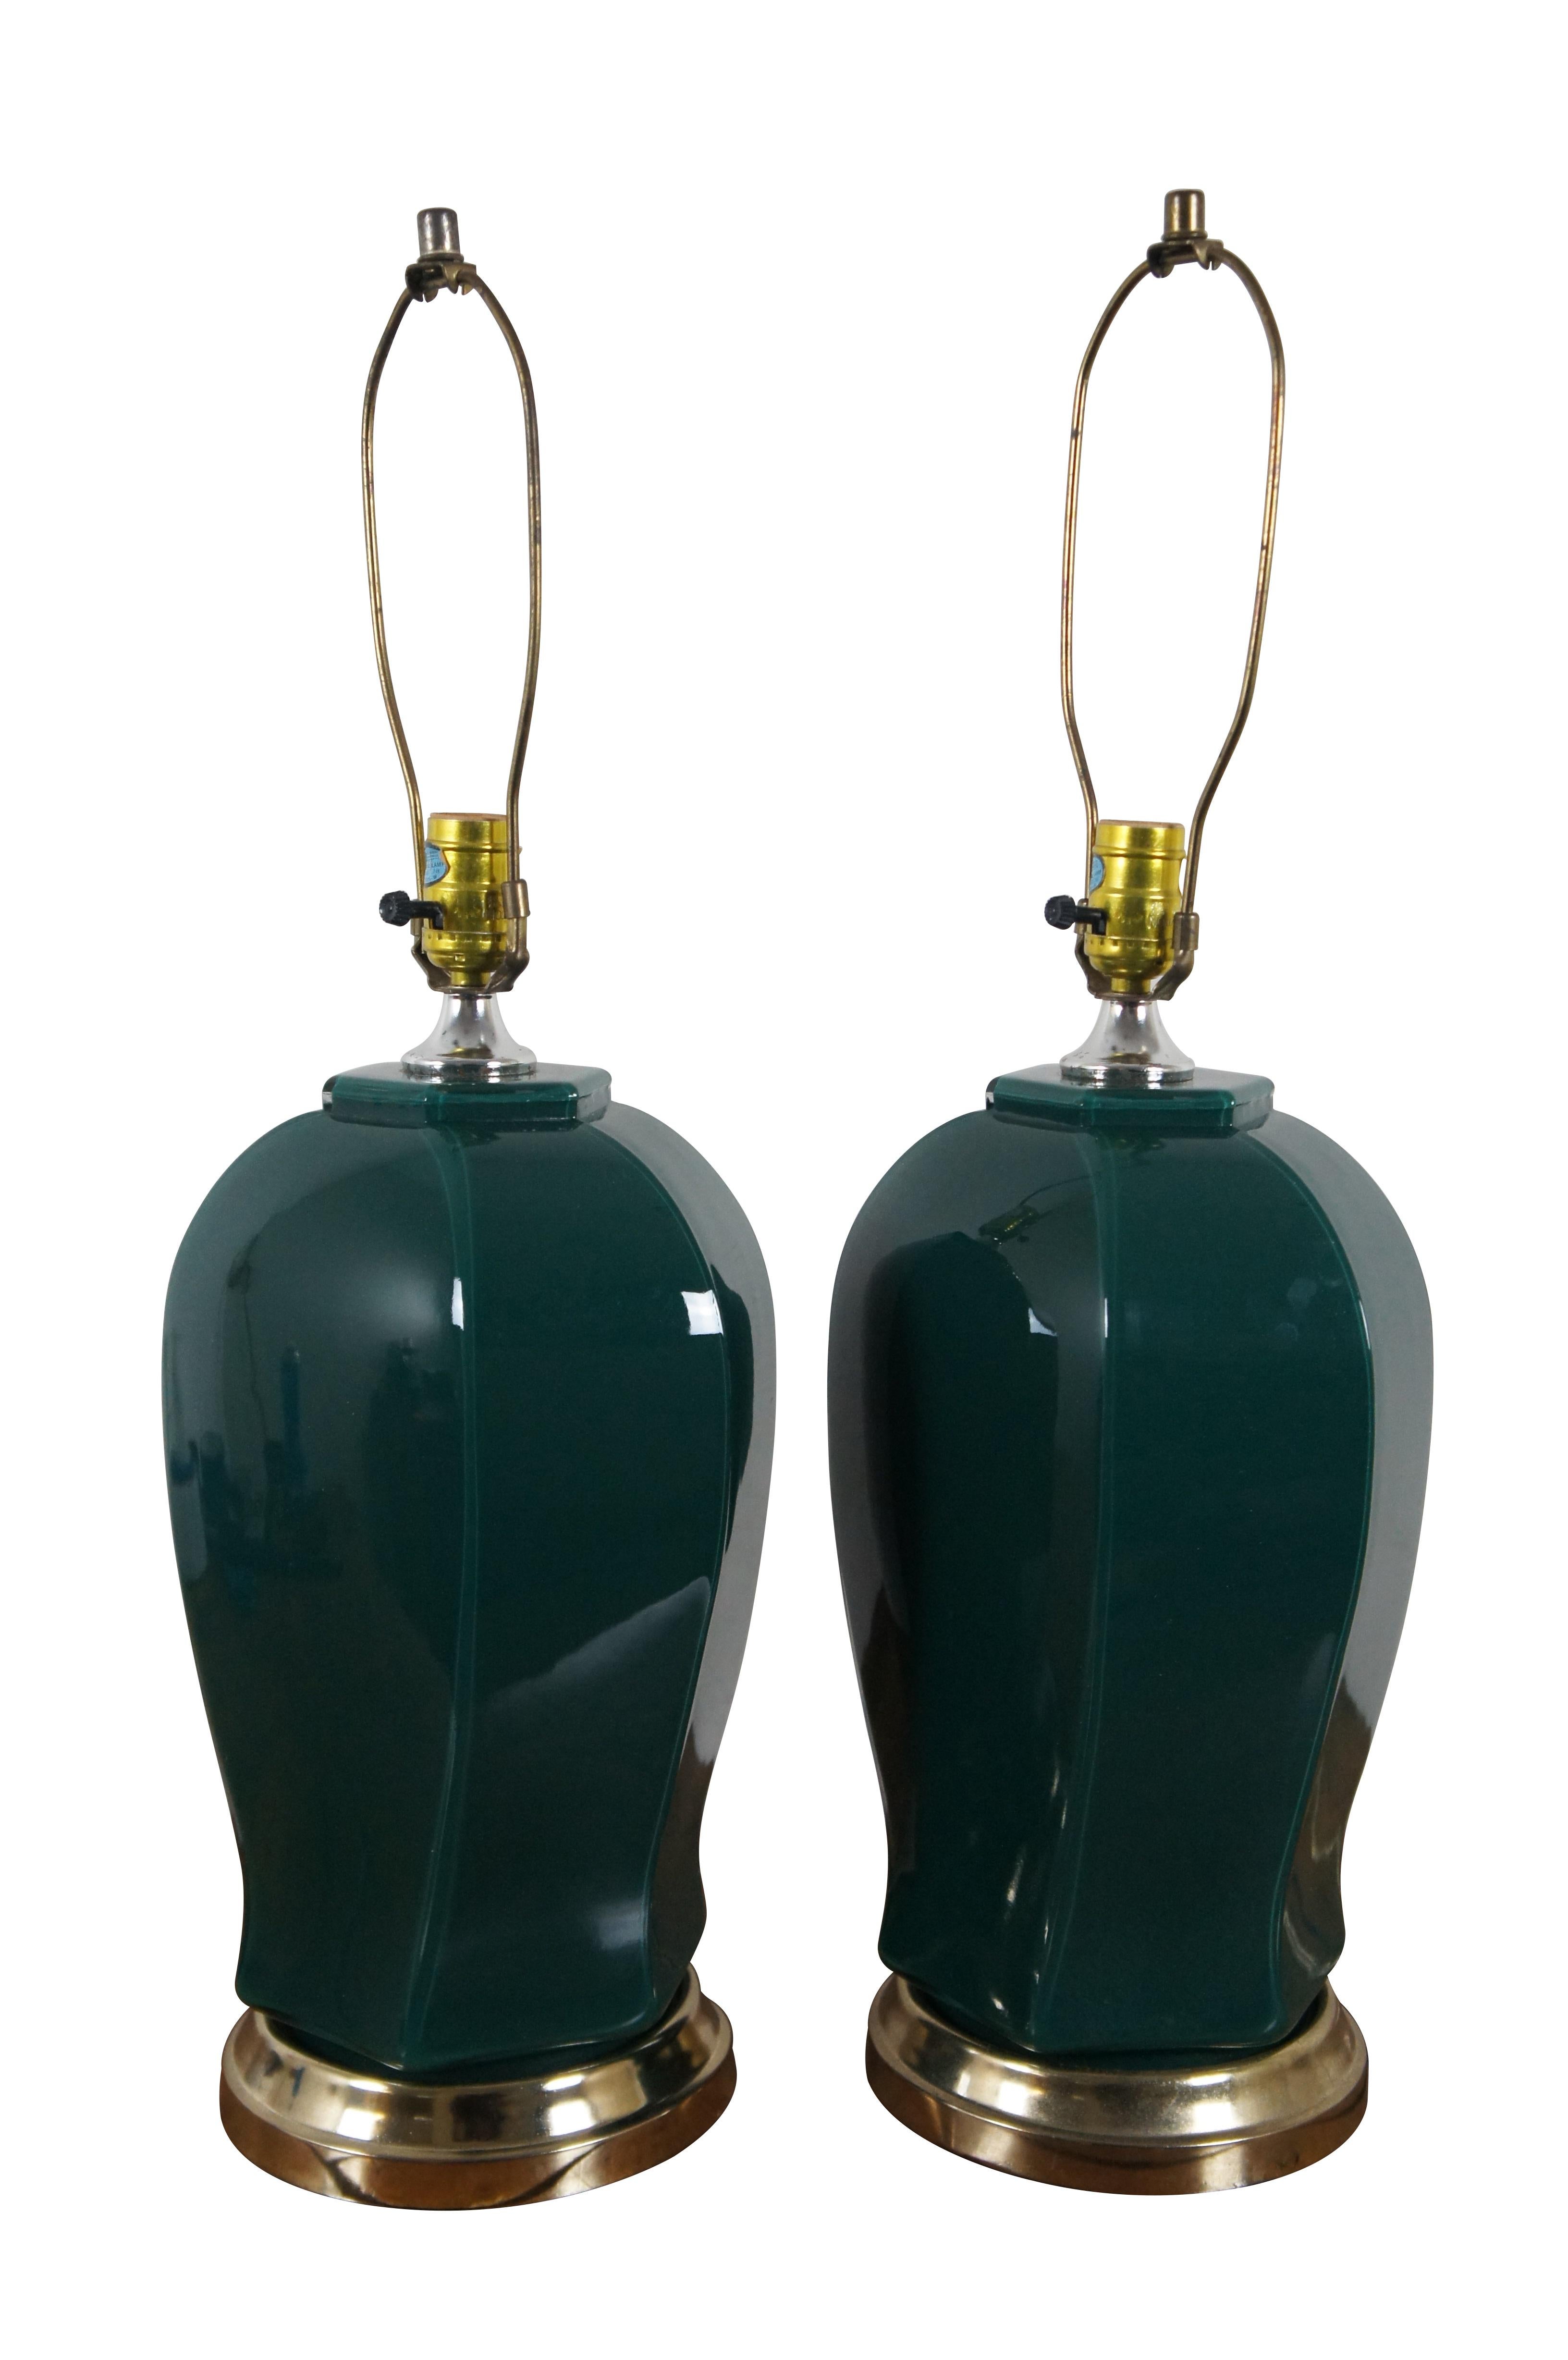 Pair of mid 20th century glass table lamps, reverse painted in forest green featuring brass bases and a unique faceted ginger jar / urn shaped body. Includes harp and simple cap shaped finials.

Dimensions:
10